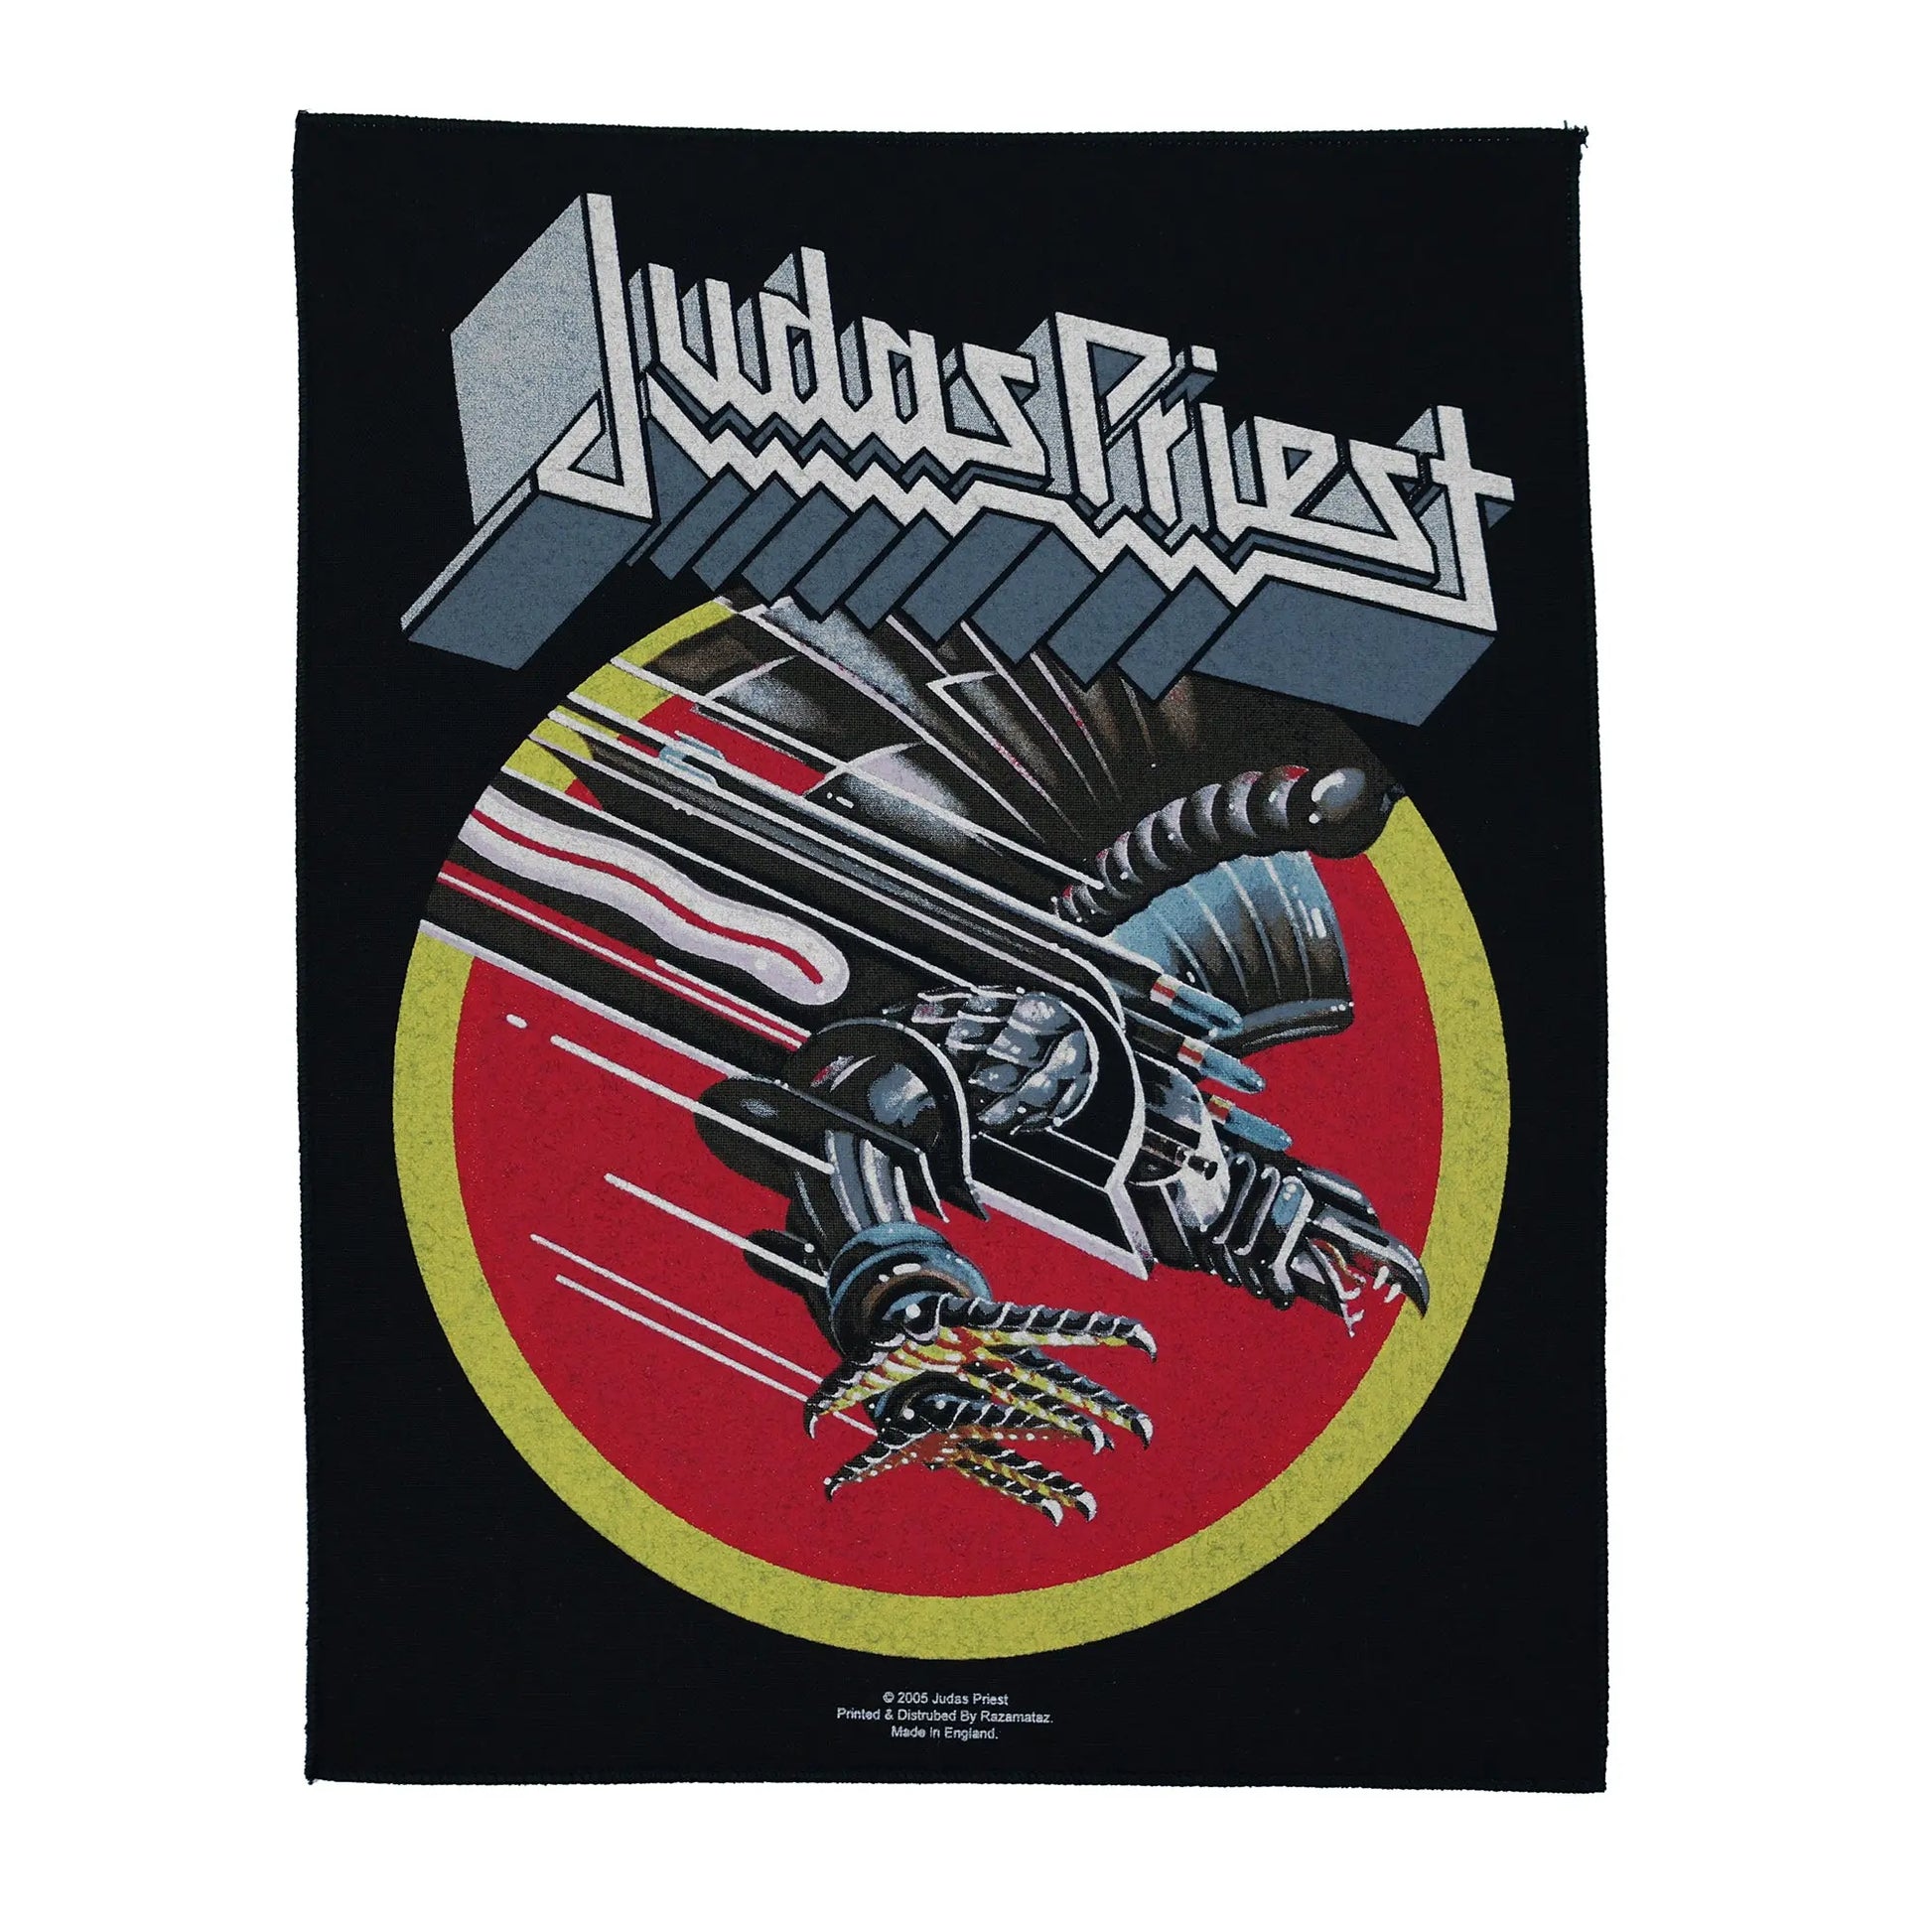 Judas Priest Screaming For Vengeance Patch 1982 Album XL Woven Sew On 